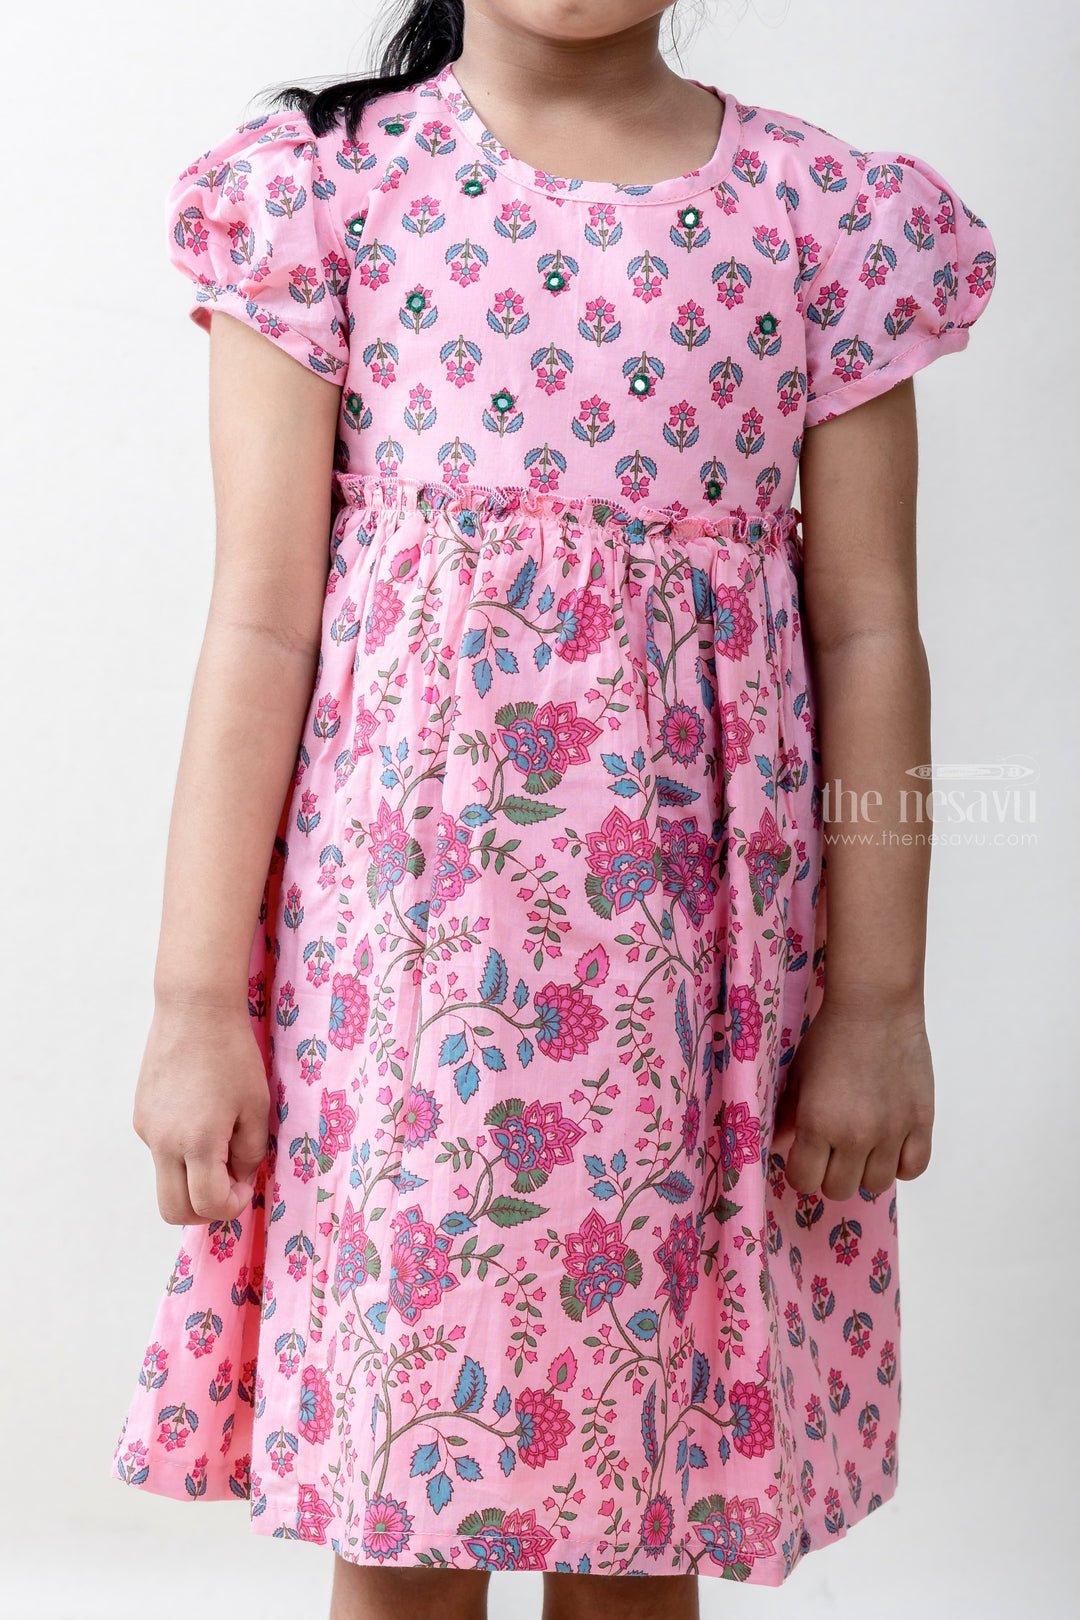 The Nesavu Frocks & Dresses Unique Lavender Printed Cotton Gown For Baby Girls With Puff Sleeve psr silks Nesavu